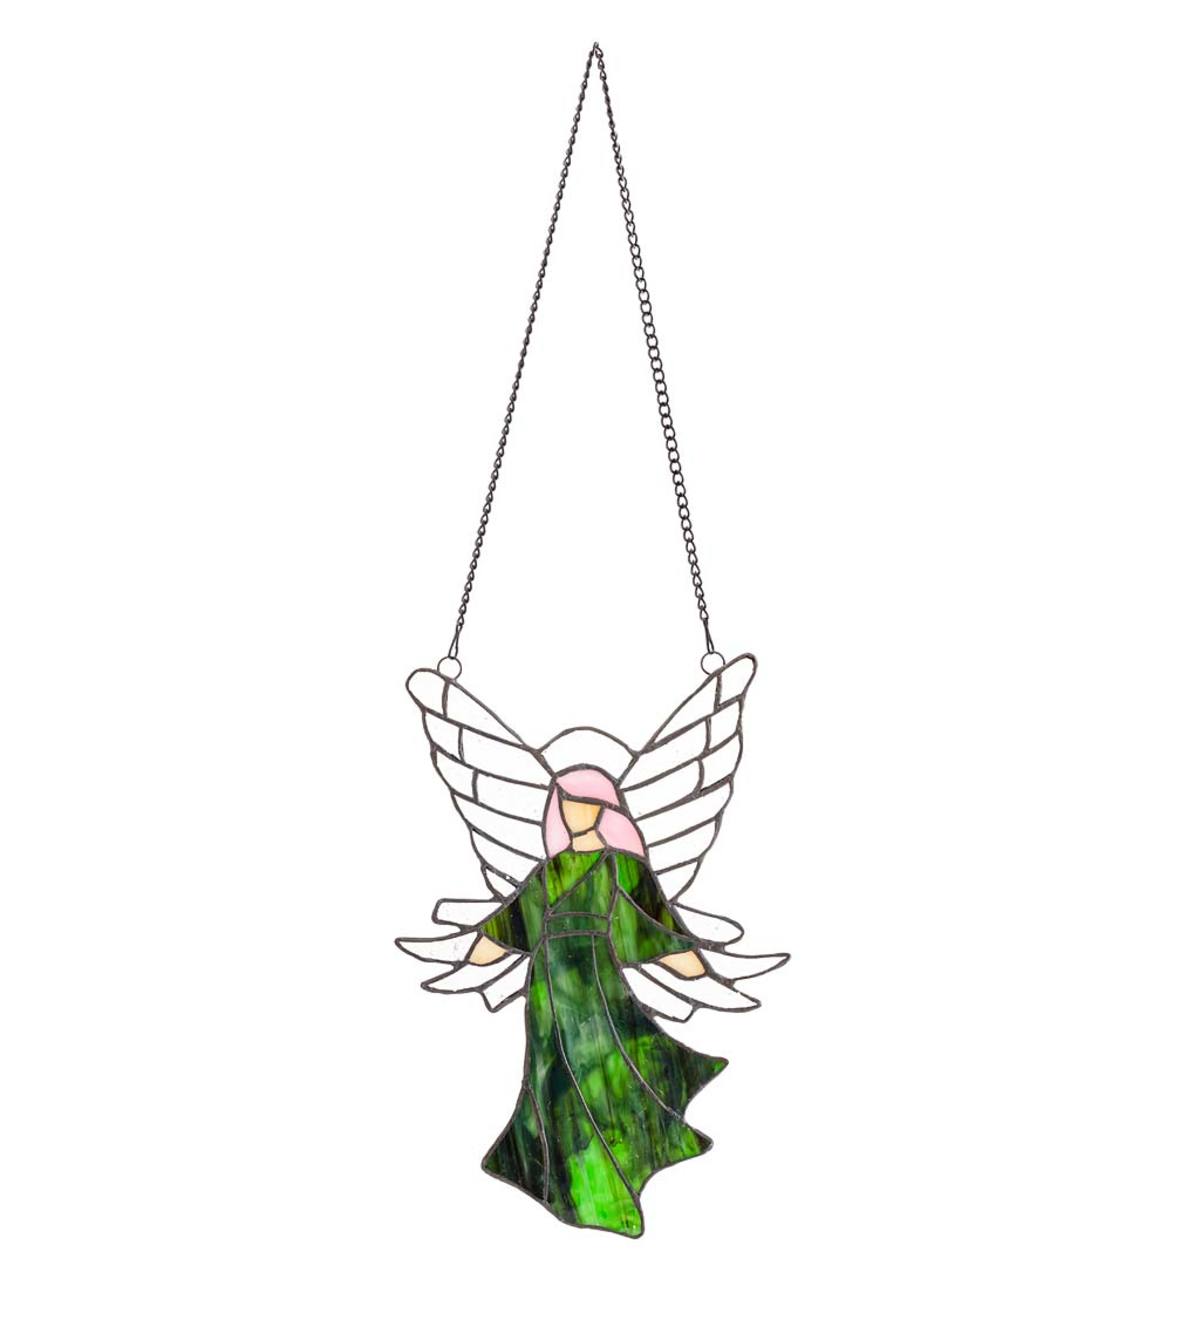 Details about   Stained Glass Angel Suncatcher Window Hangings Guardian Angel Home Decor Panel 